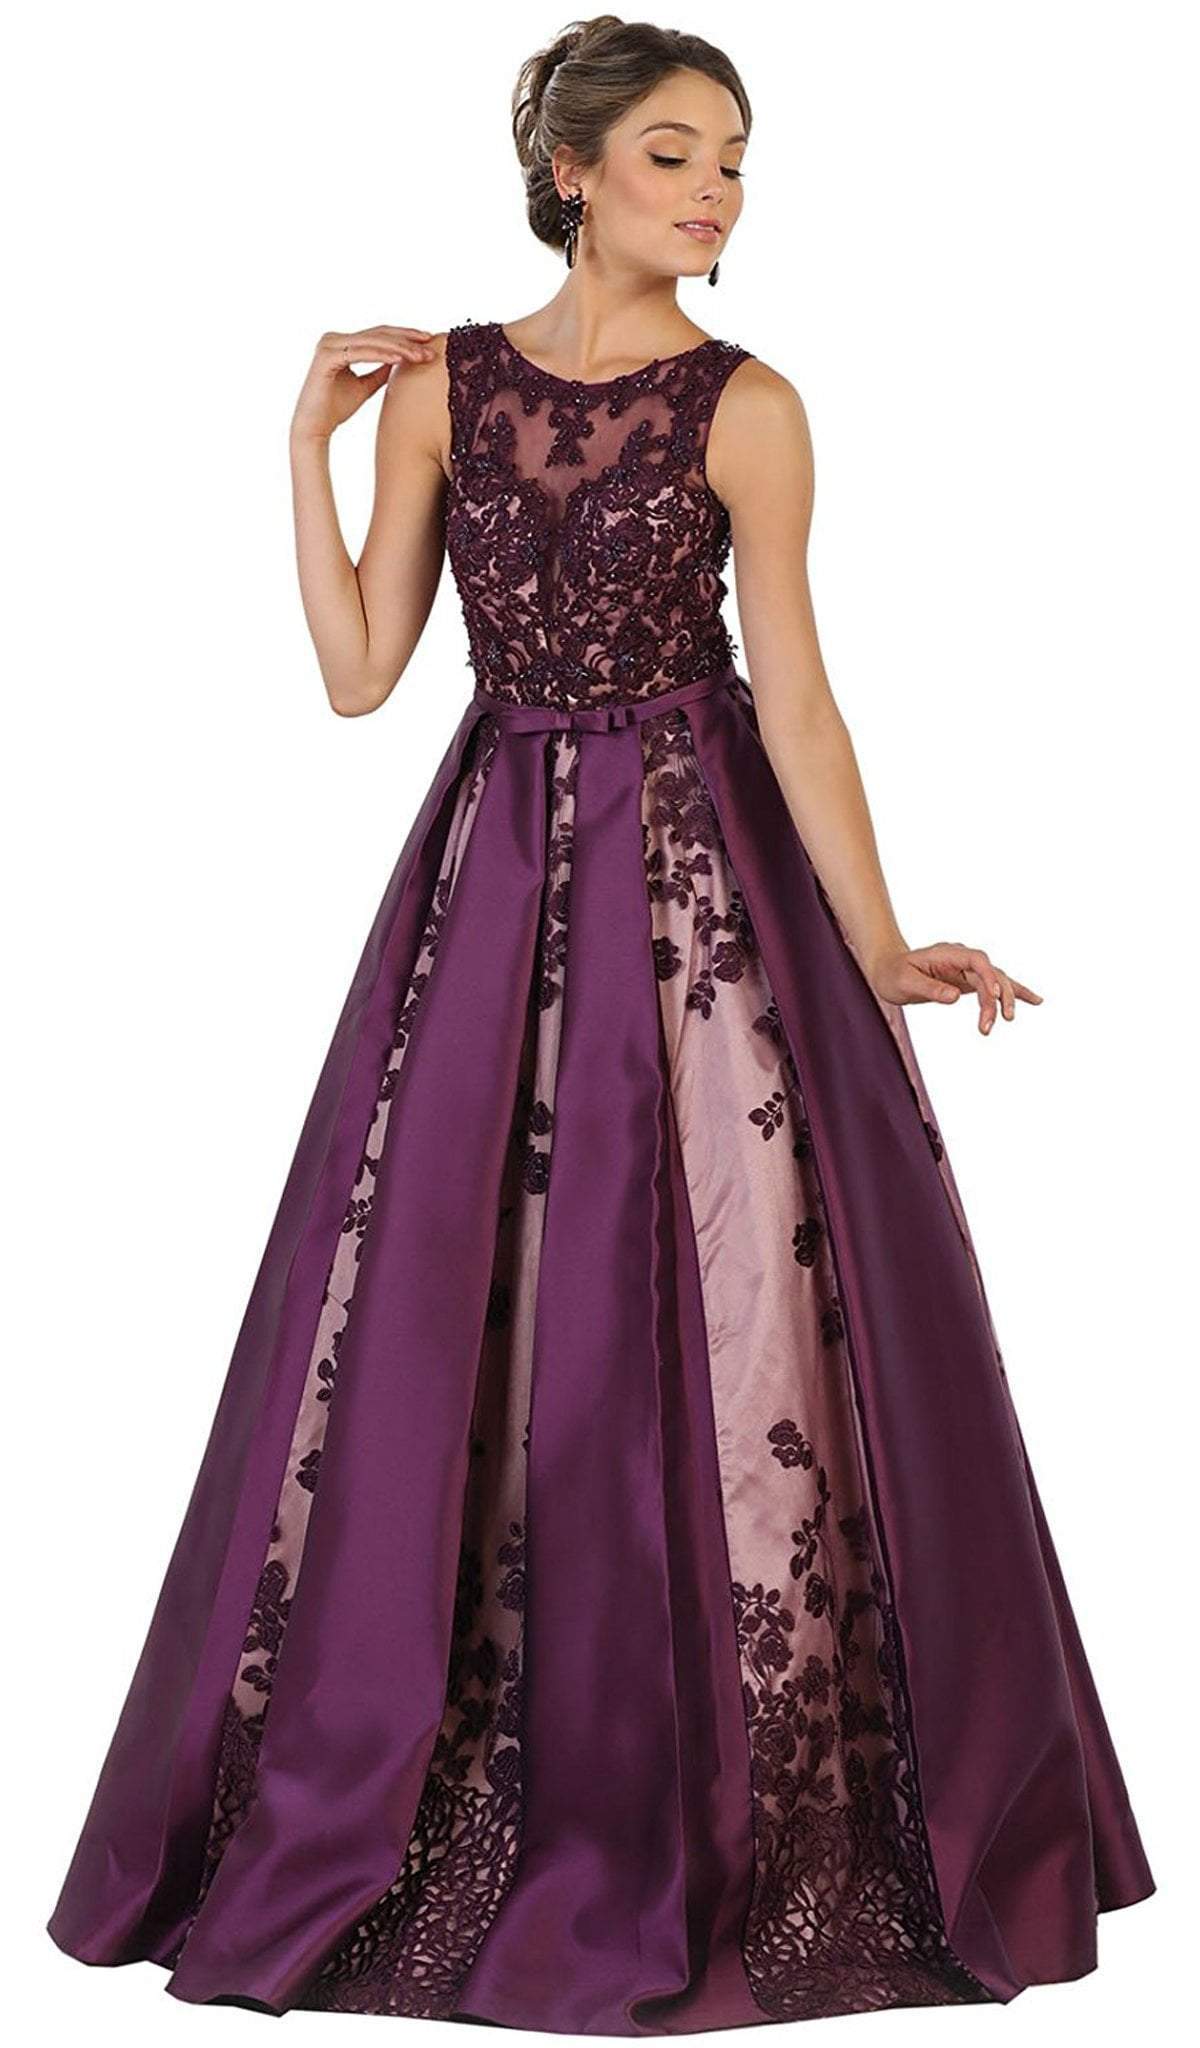 May Queen - Embroidered Sleeveless Mesh Satin Evening Gown Special Occasion Dress 4 / Eggplant